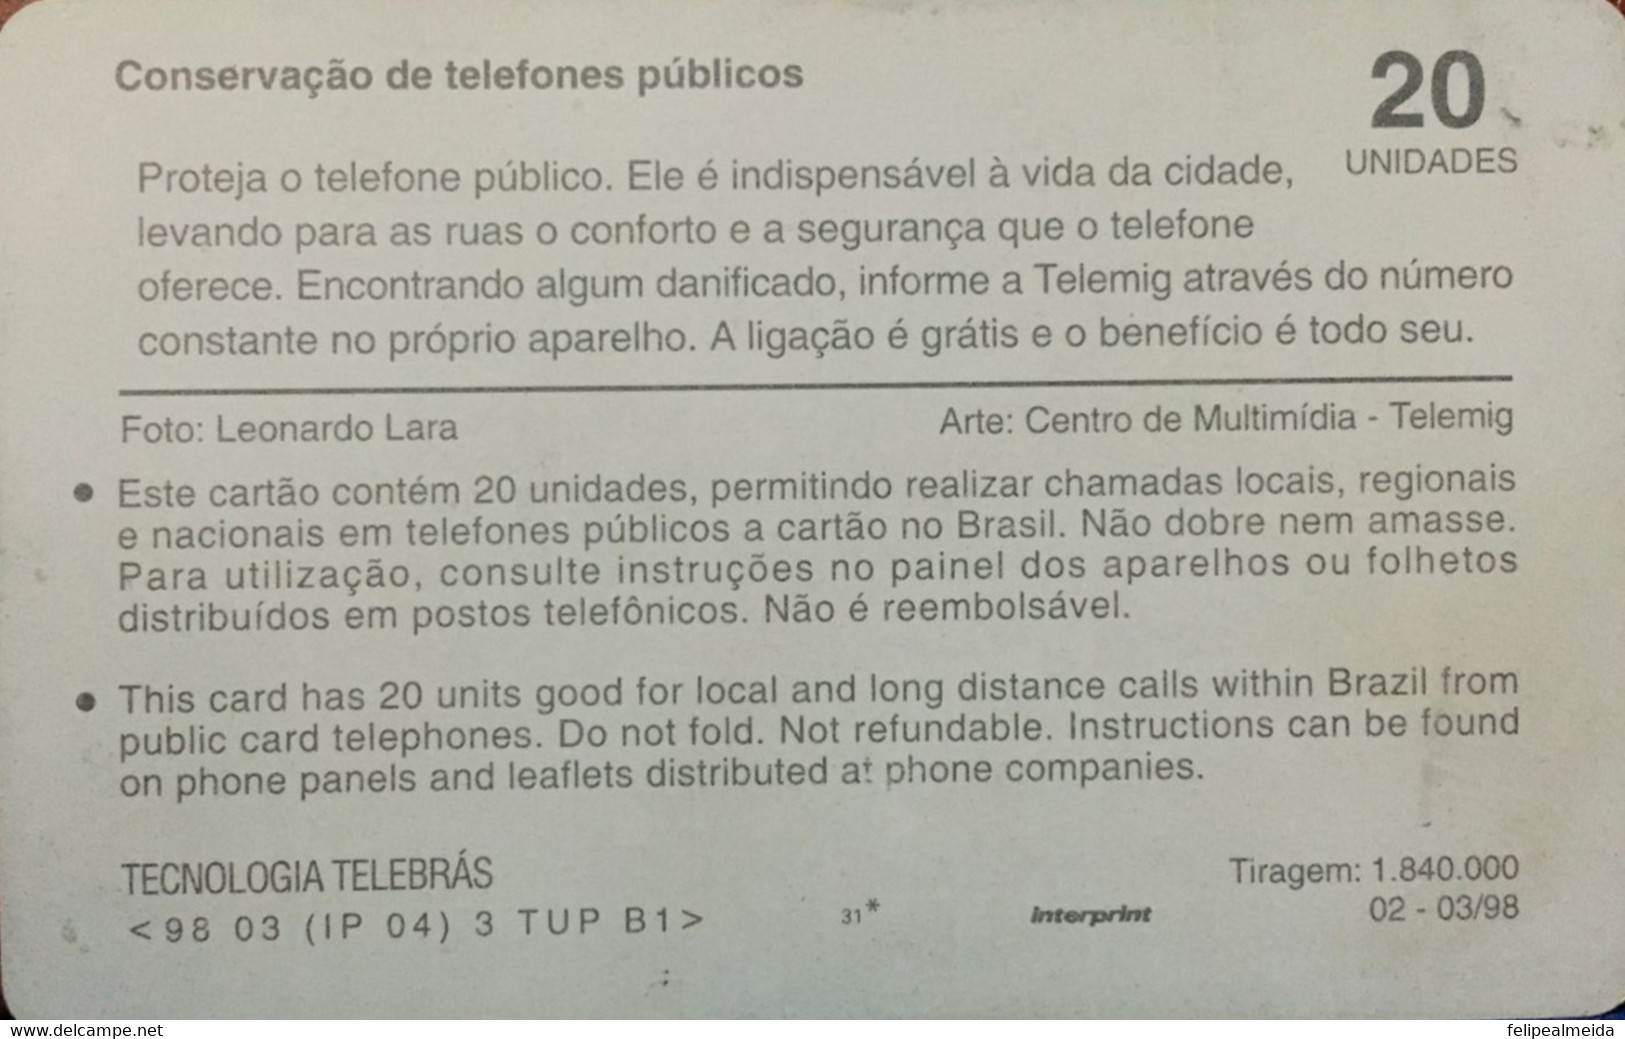 Phone Card Manufactured By Telebras In 1998 - Advertising Campaign For The Conservation Of Public Telephones - Operadores De Telecom